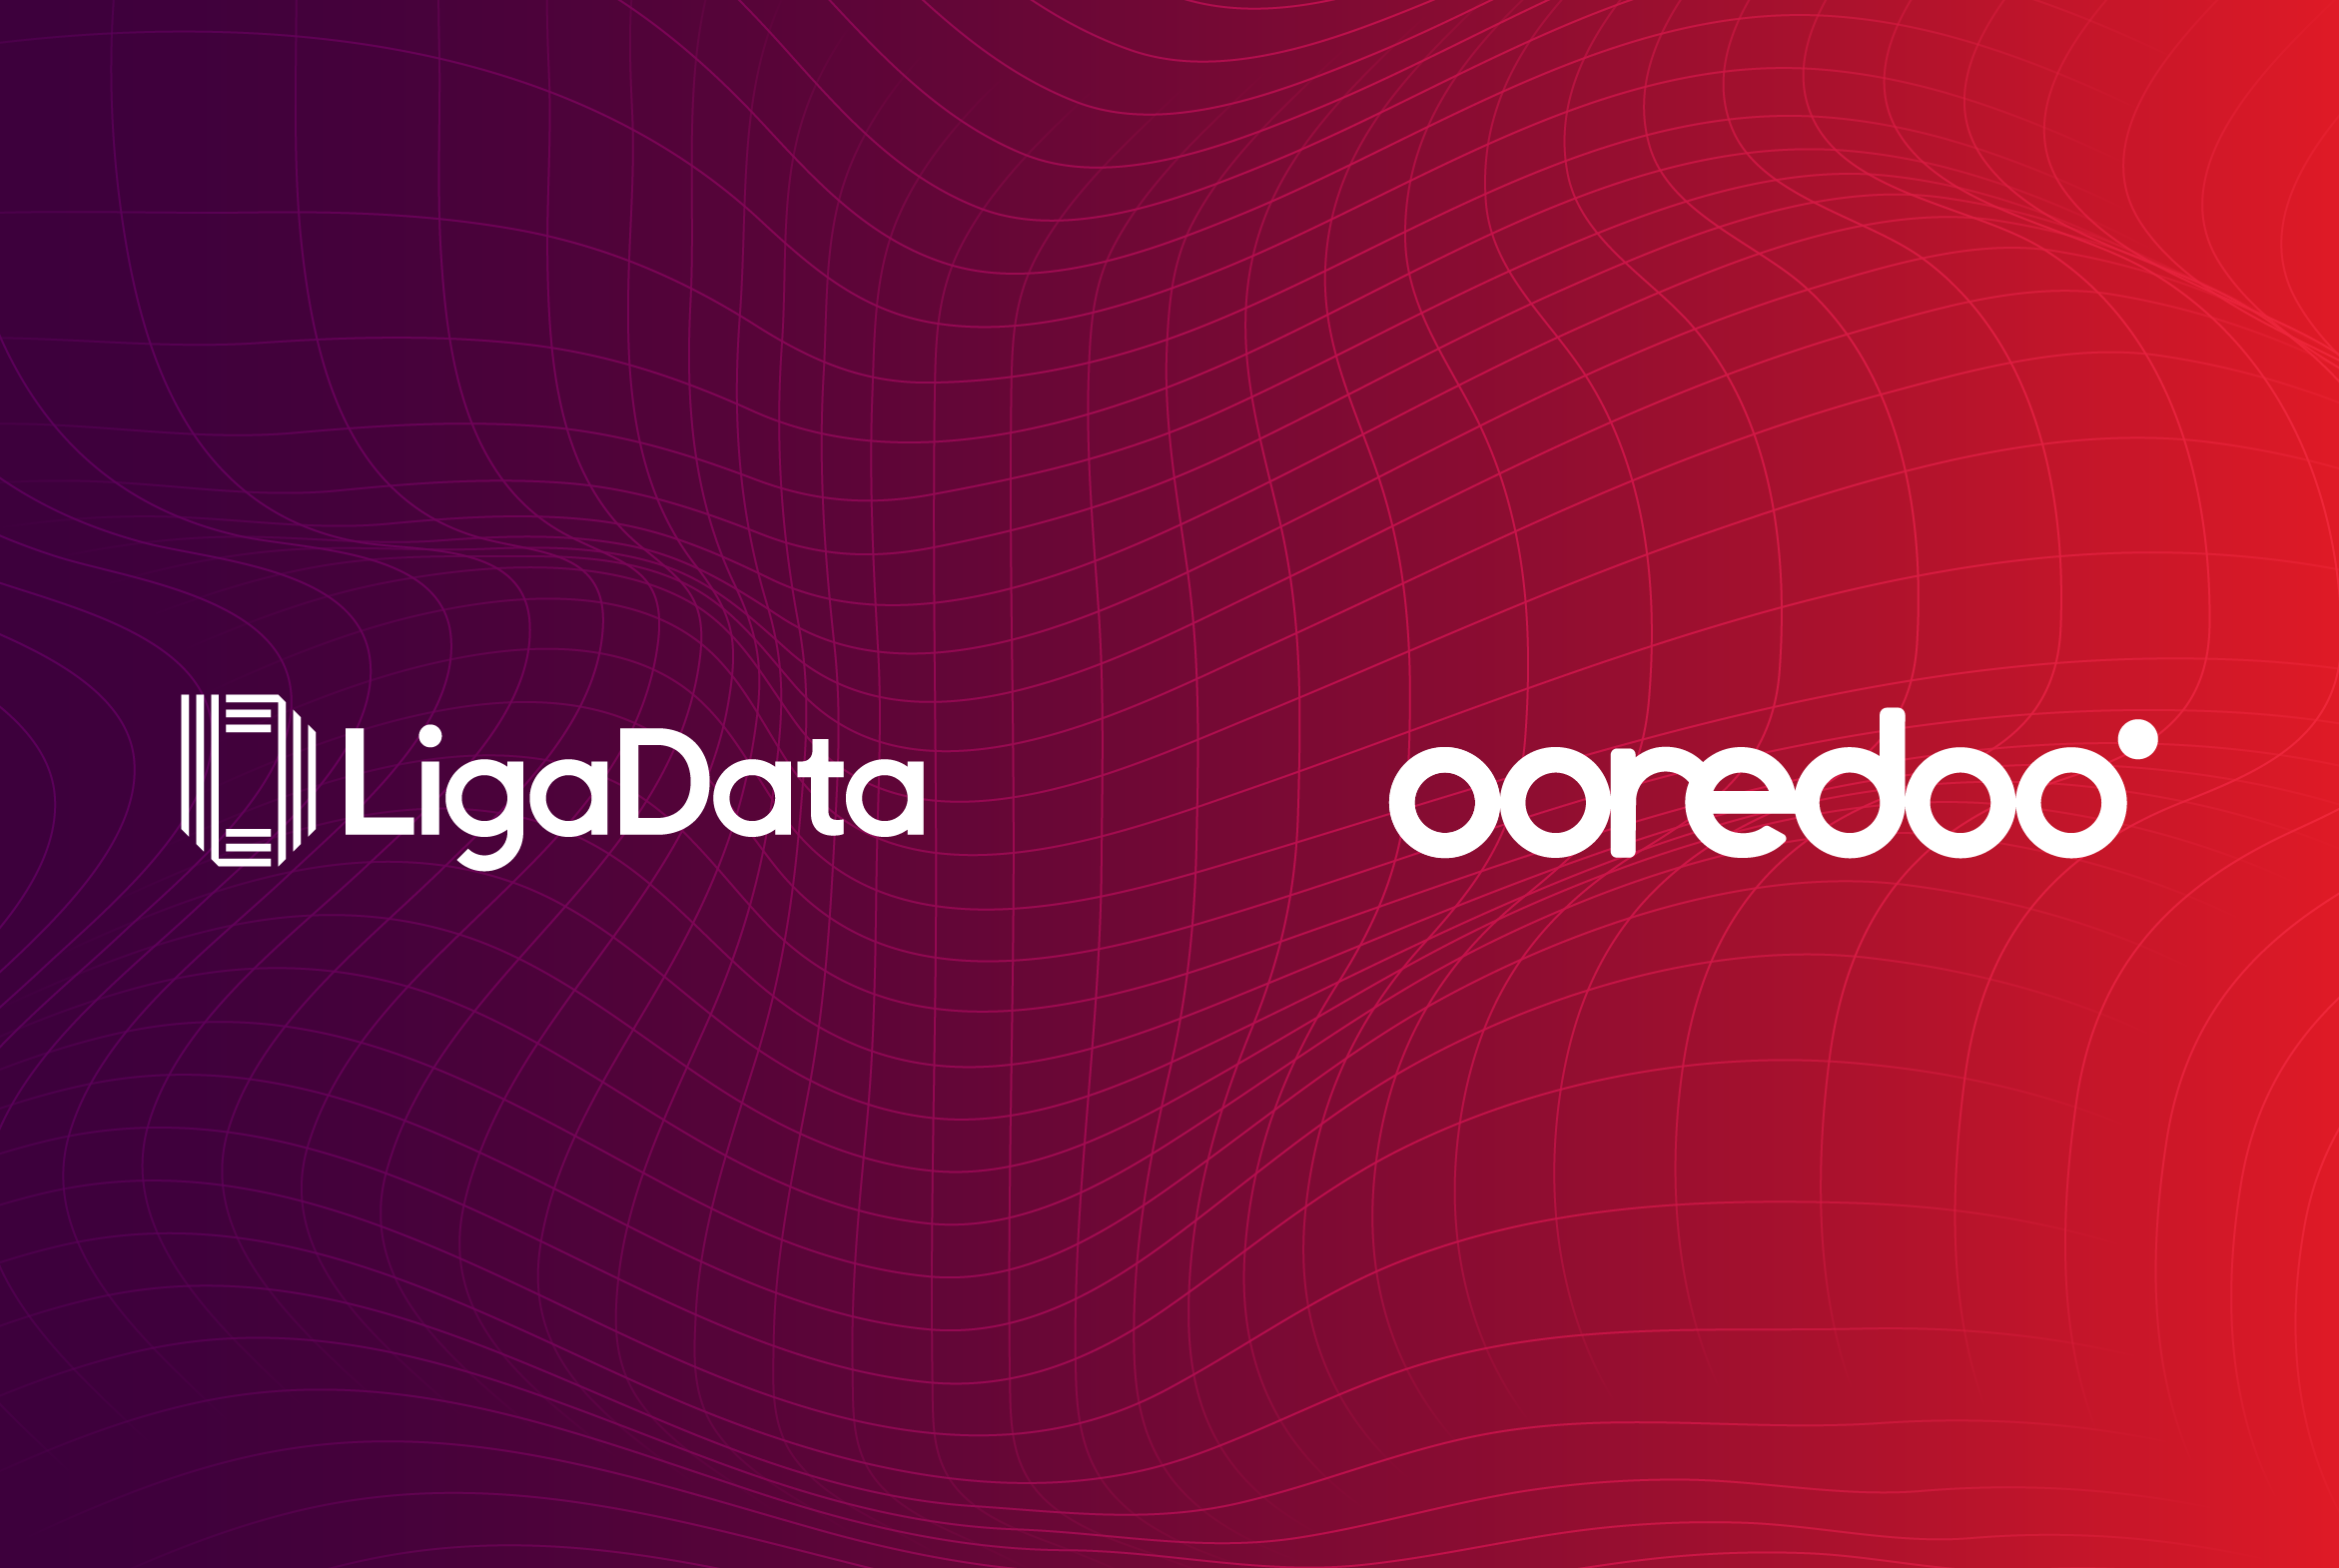 Revolutionizing Telecom: Ooredoo Tunisia Partners with LigaData for Data-Driven Operational Excellence